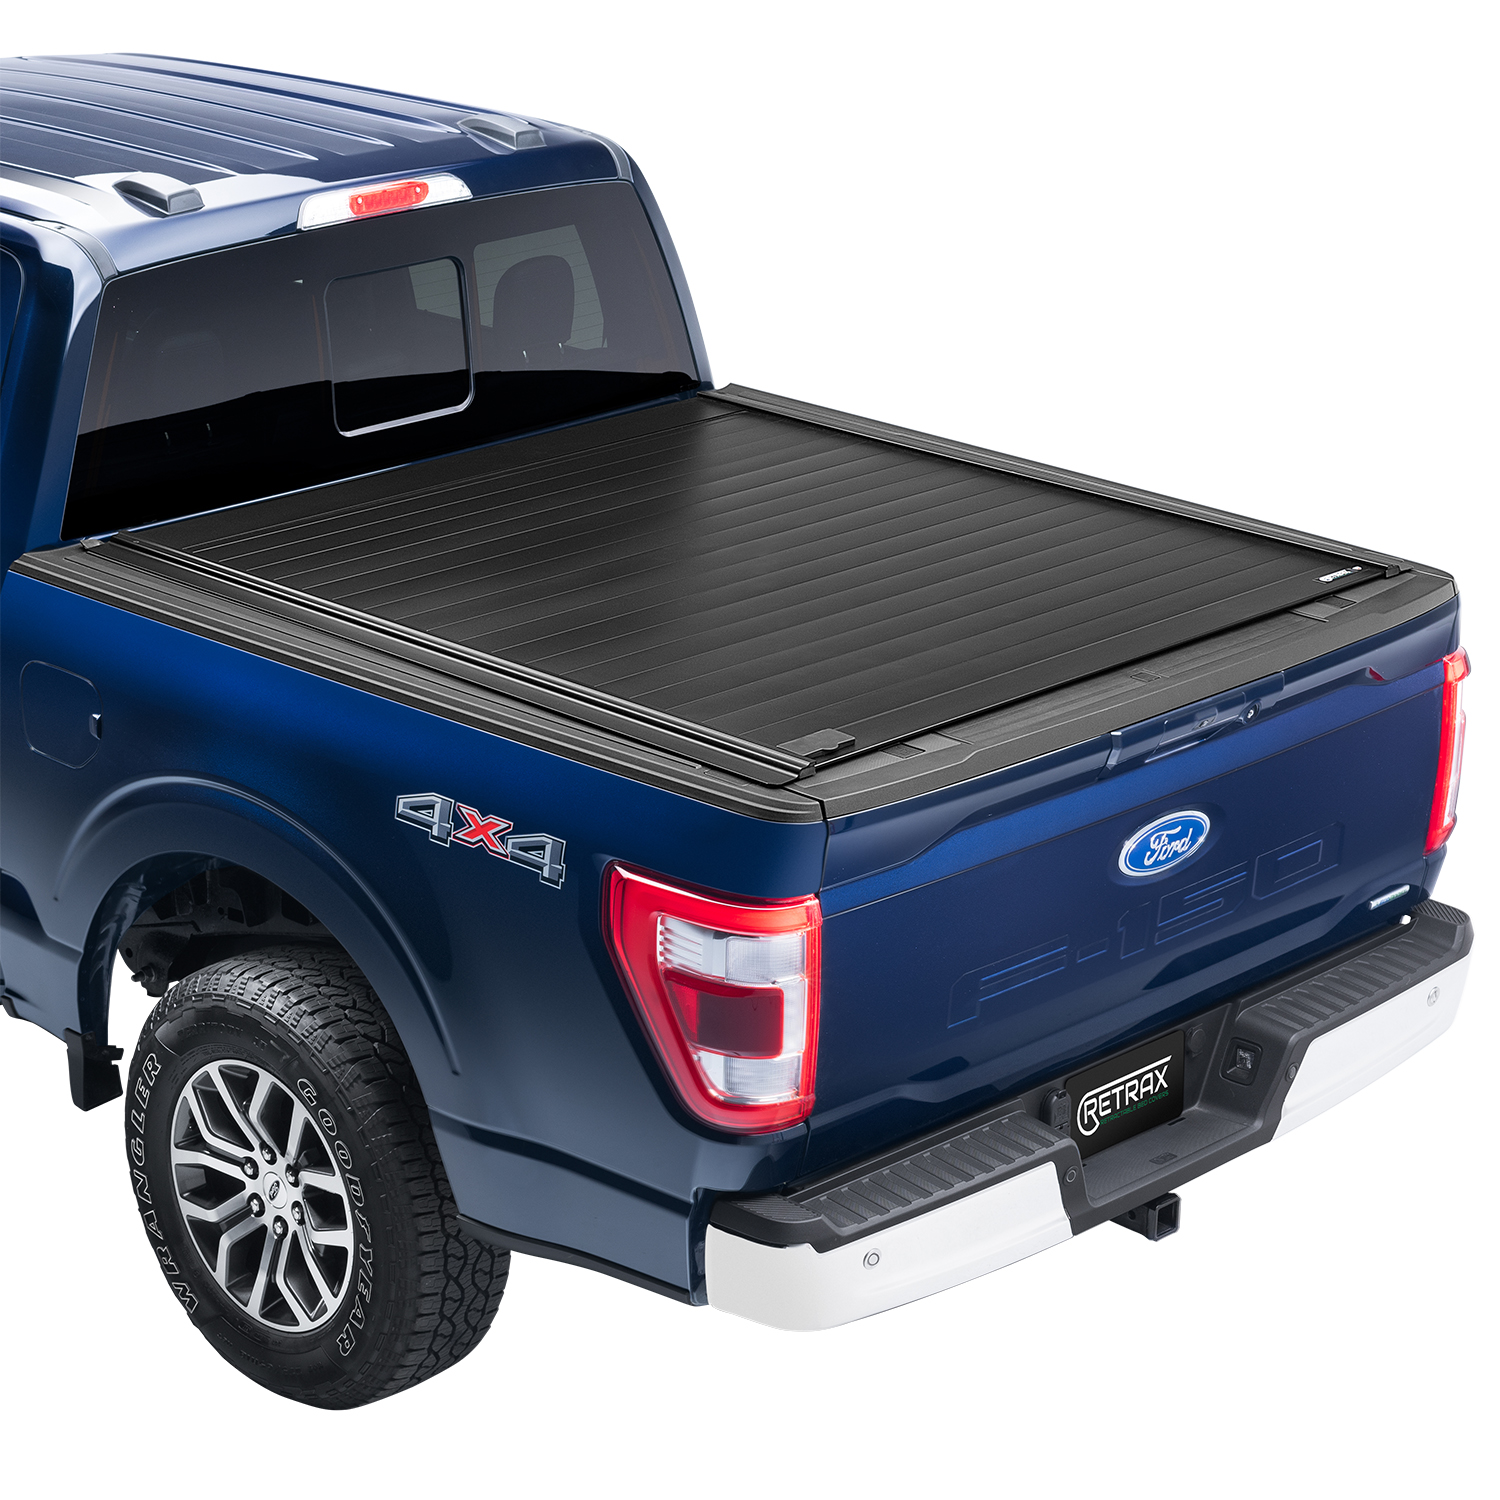 RetraxPRO MX Retractable Truck Bed Tonneau Cover | 80846 | Fits 2007 - 2021 Toyota Tundra Regular & Double Cab w/ Deck Rail System w/ stake pocket access 6' 7" Bed (78.7") - image 1 of 8